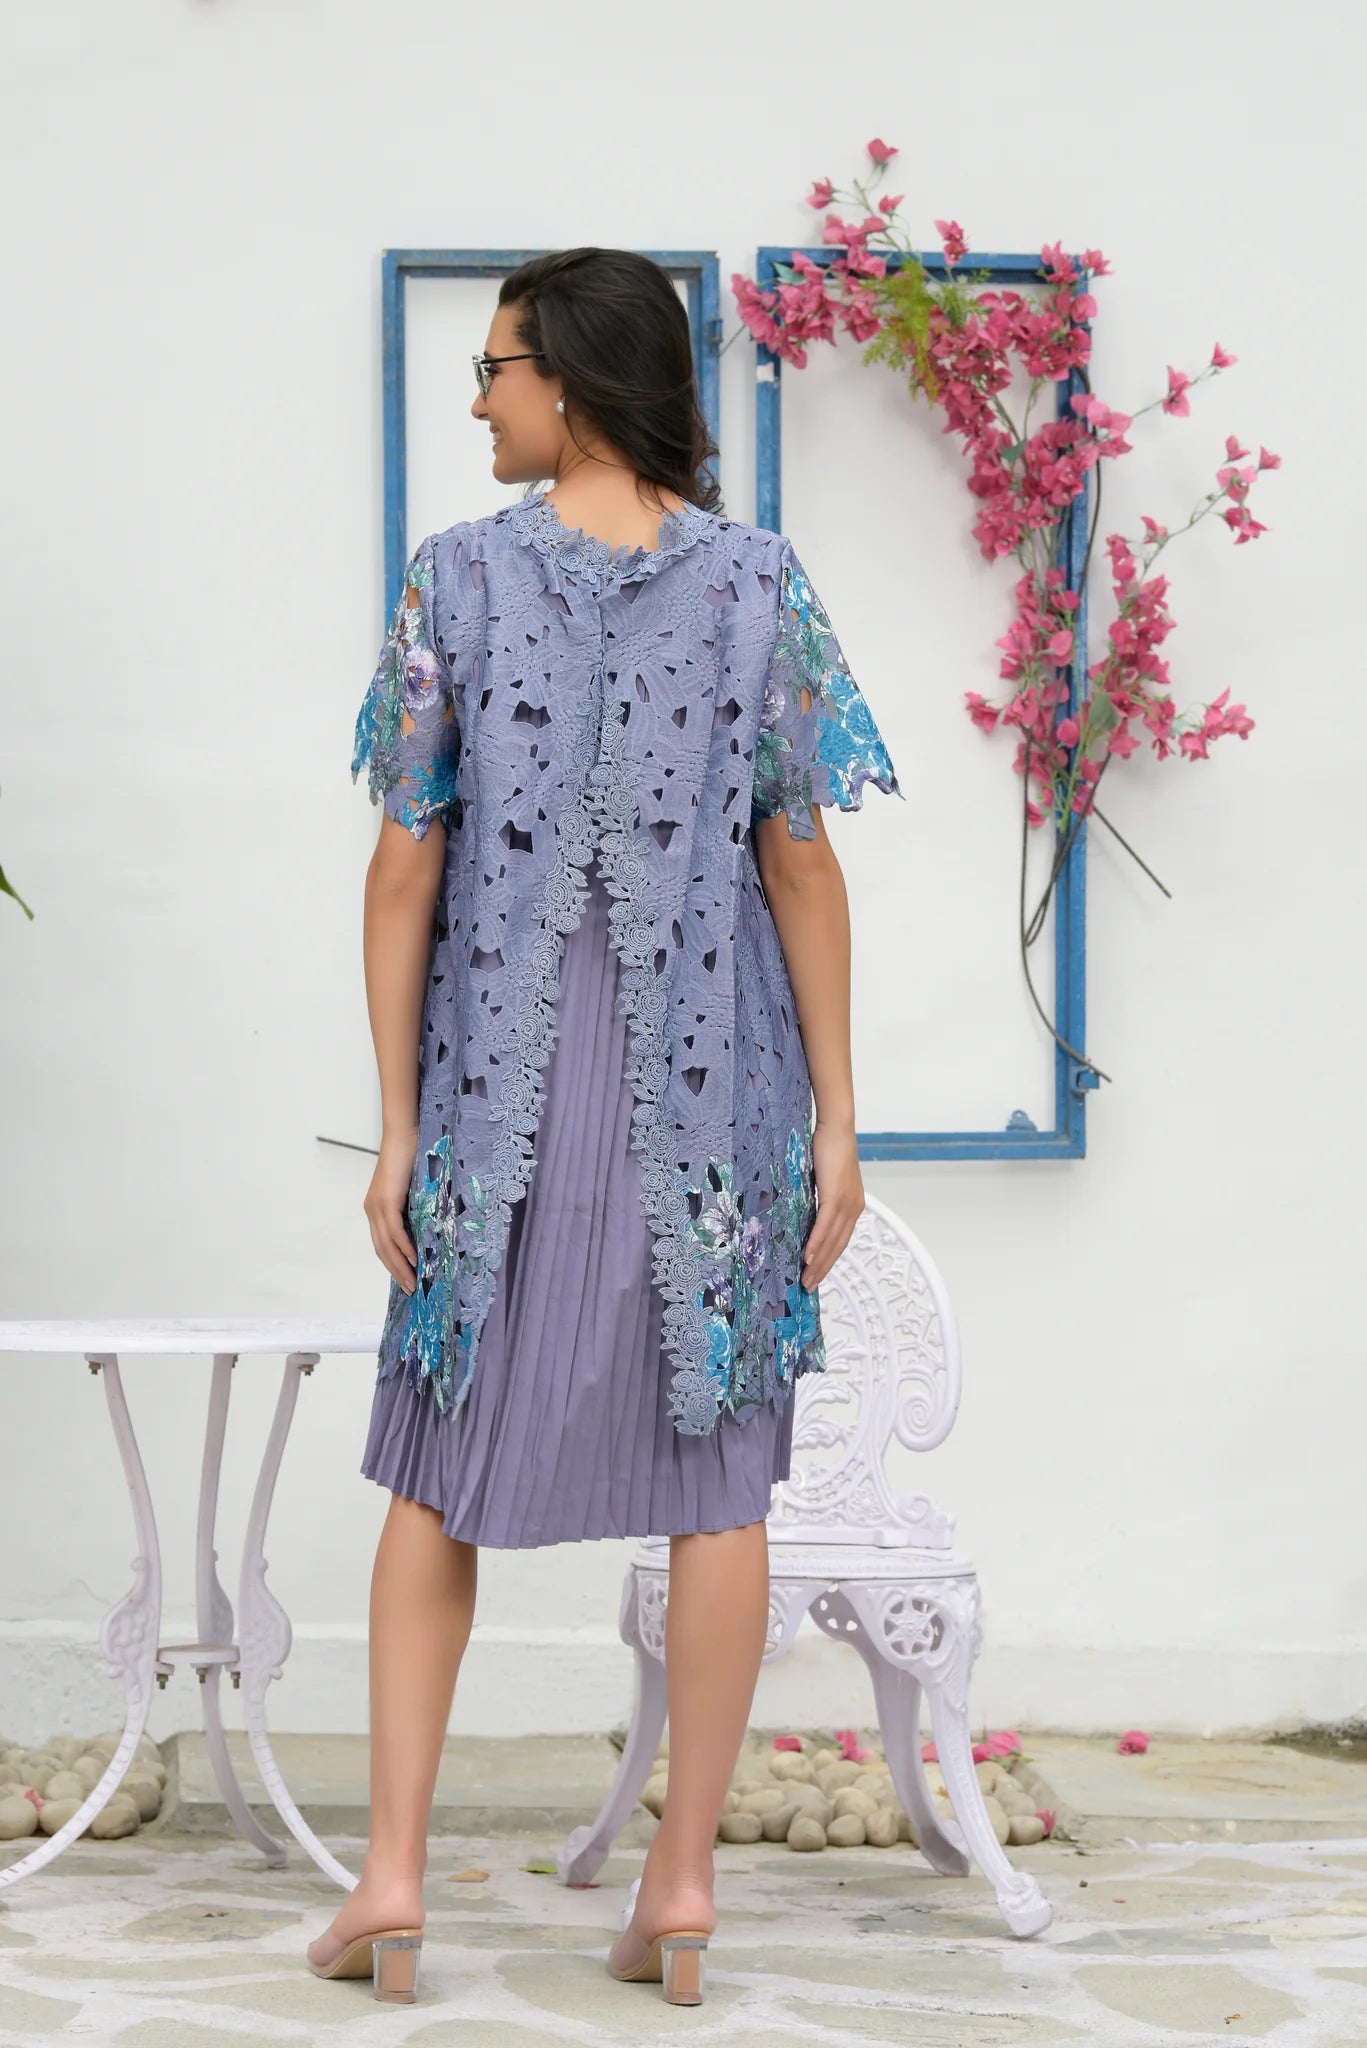 Image of The MYRA MESH IRIS LACE DRESS- LAVENDER exudes sophistication and style. The lavender color adds a subtle pop of color to your ensemble. The mesh lace construction provides a delicate, breathable feel. Experience exquisite comfort with every wear. From savoirfashions.com